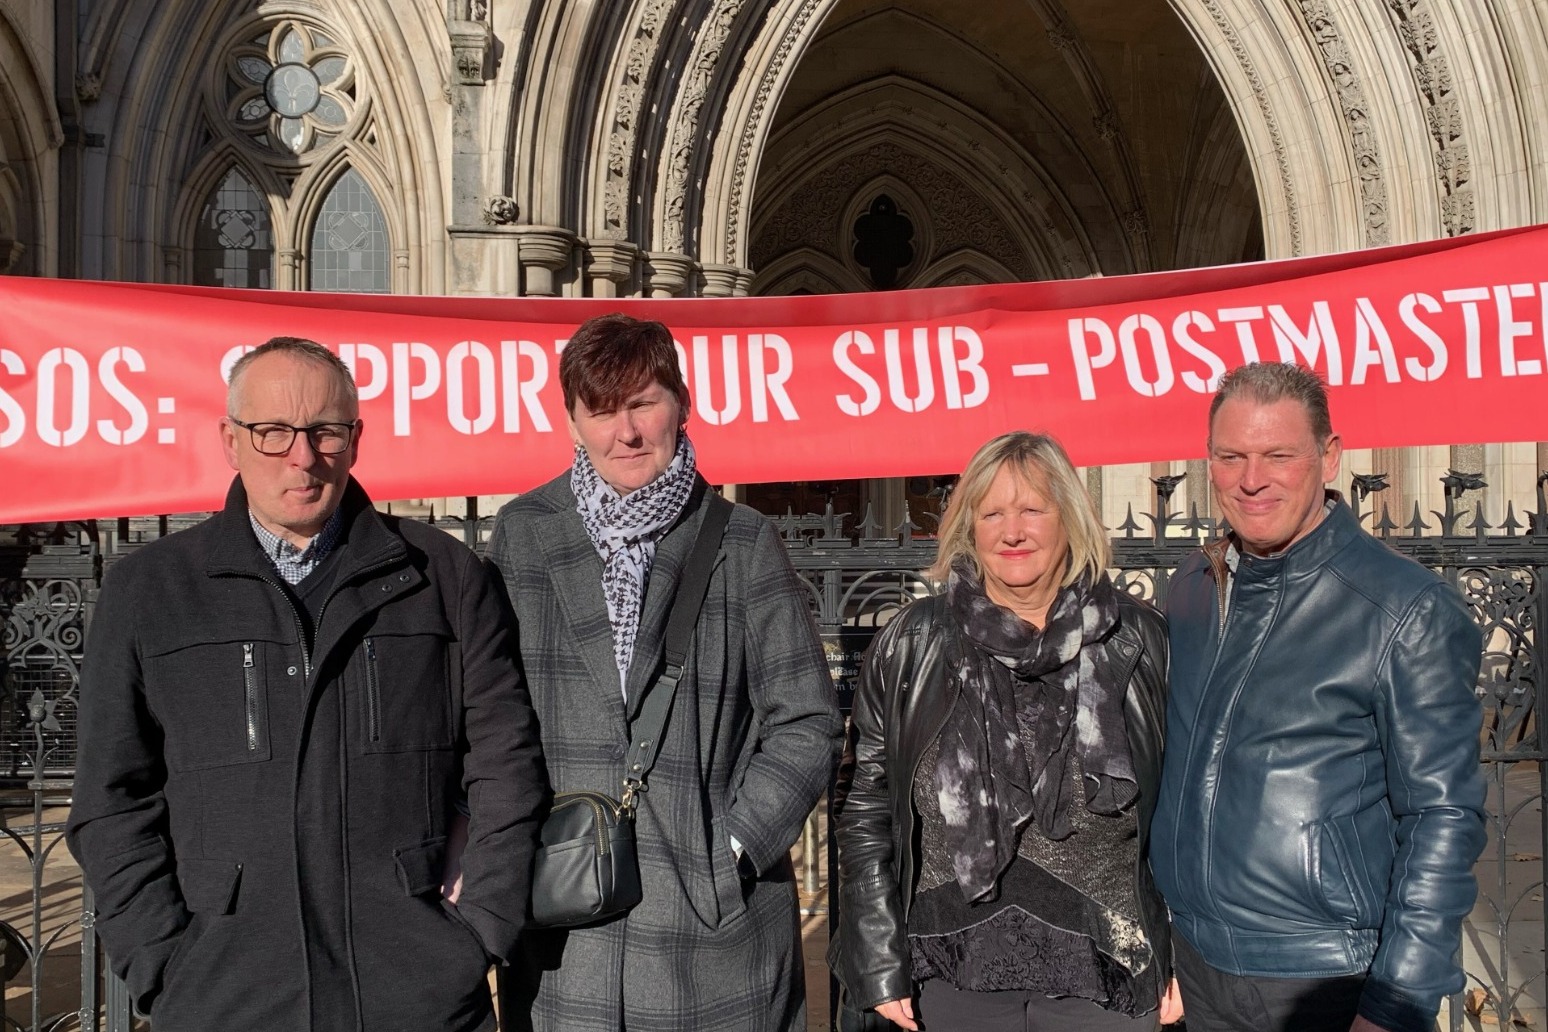 Wrongly convicted subpostmasters still awaiting compensation one year on 